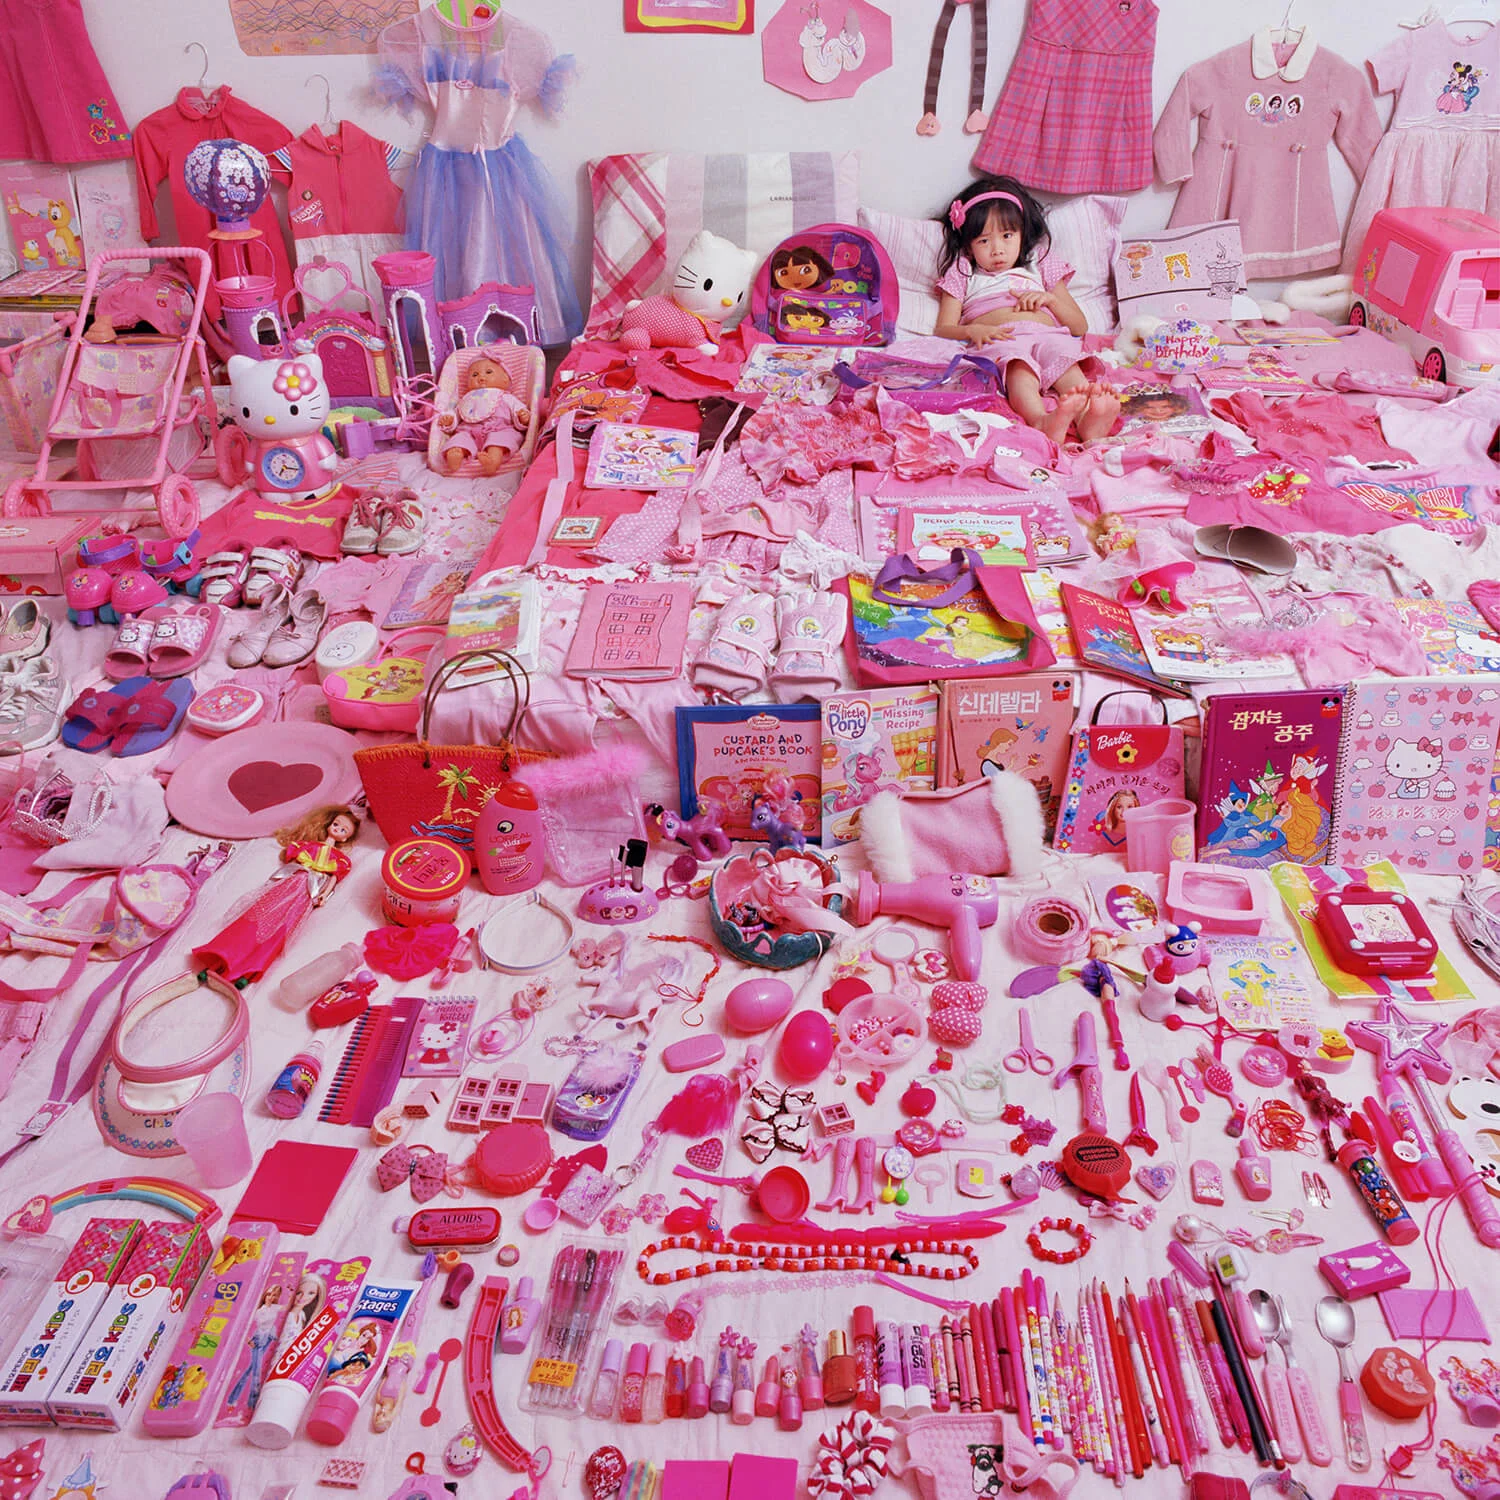 The Pink Project I - Seowoo and Her Pink Things, Light jet Print, 2005 ©JeongMee Yoon